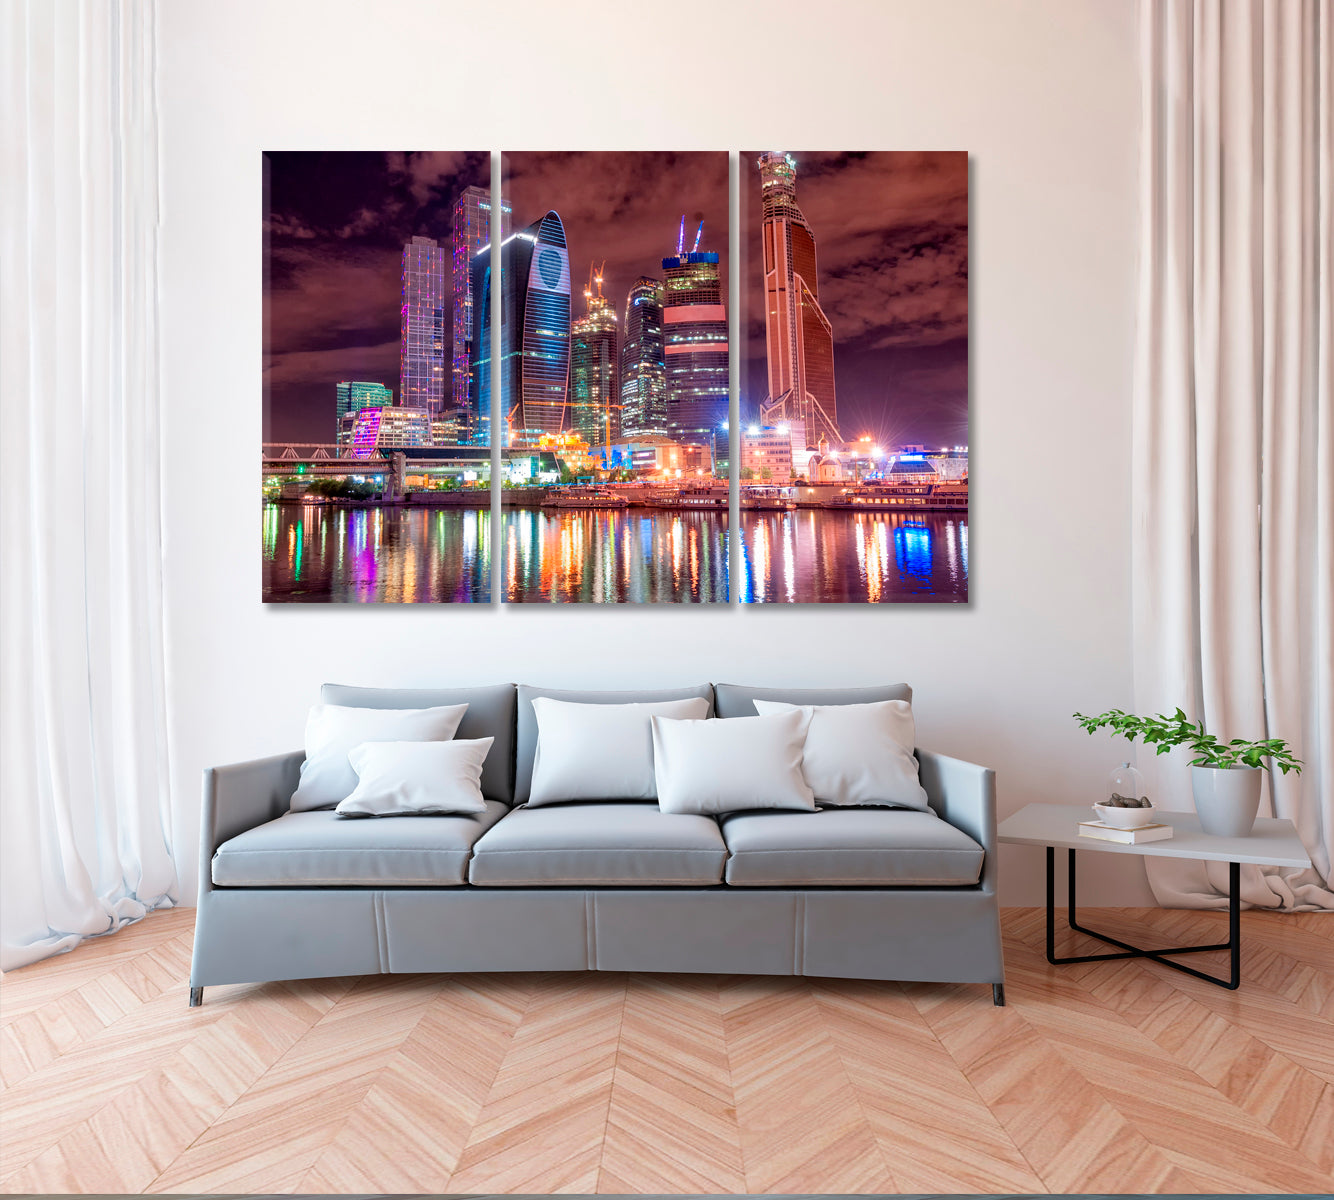 Moscow City at Night Canvas Print ArtLexy 3 Panels 36"x24" inches 